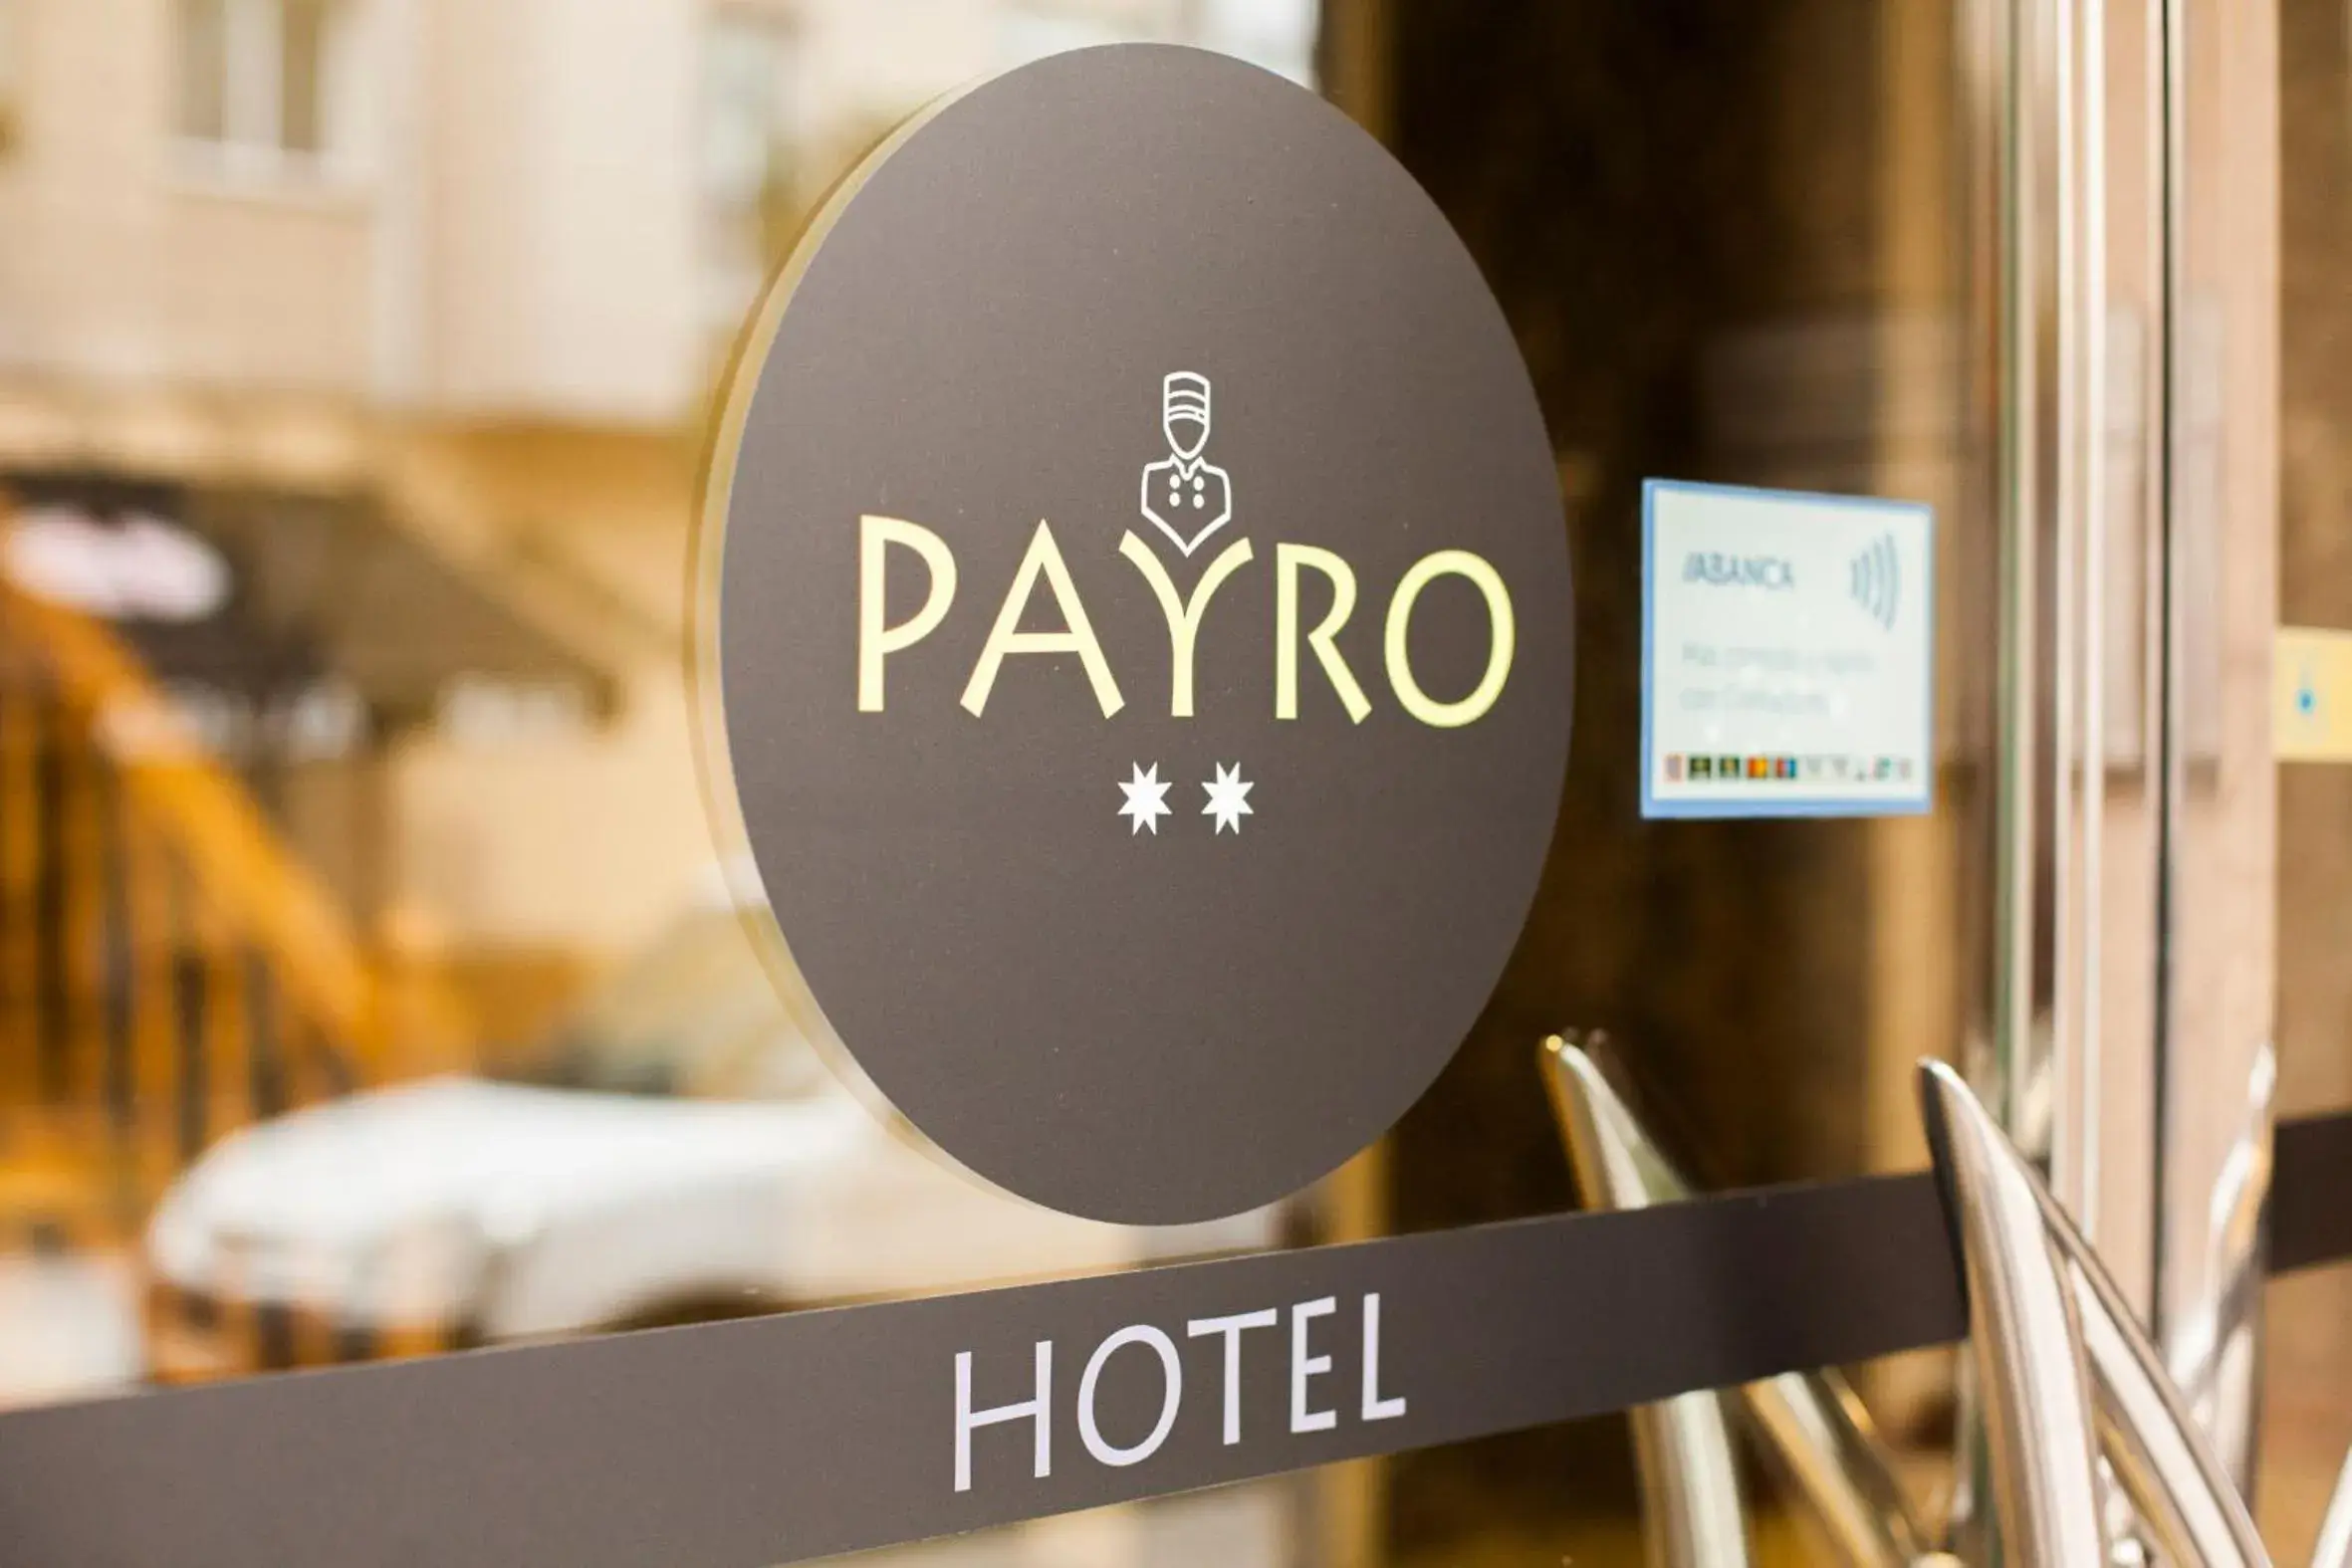 Property logo or sign, Property Logo/Sign in Hotel PAYRO **